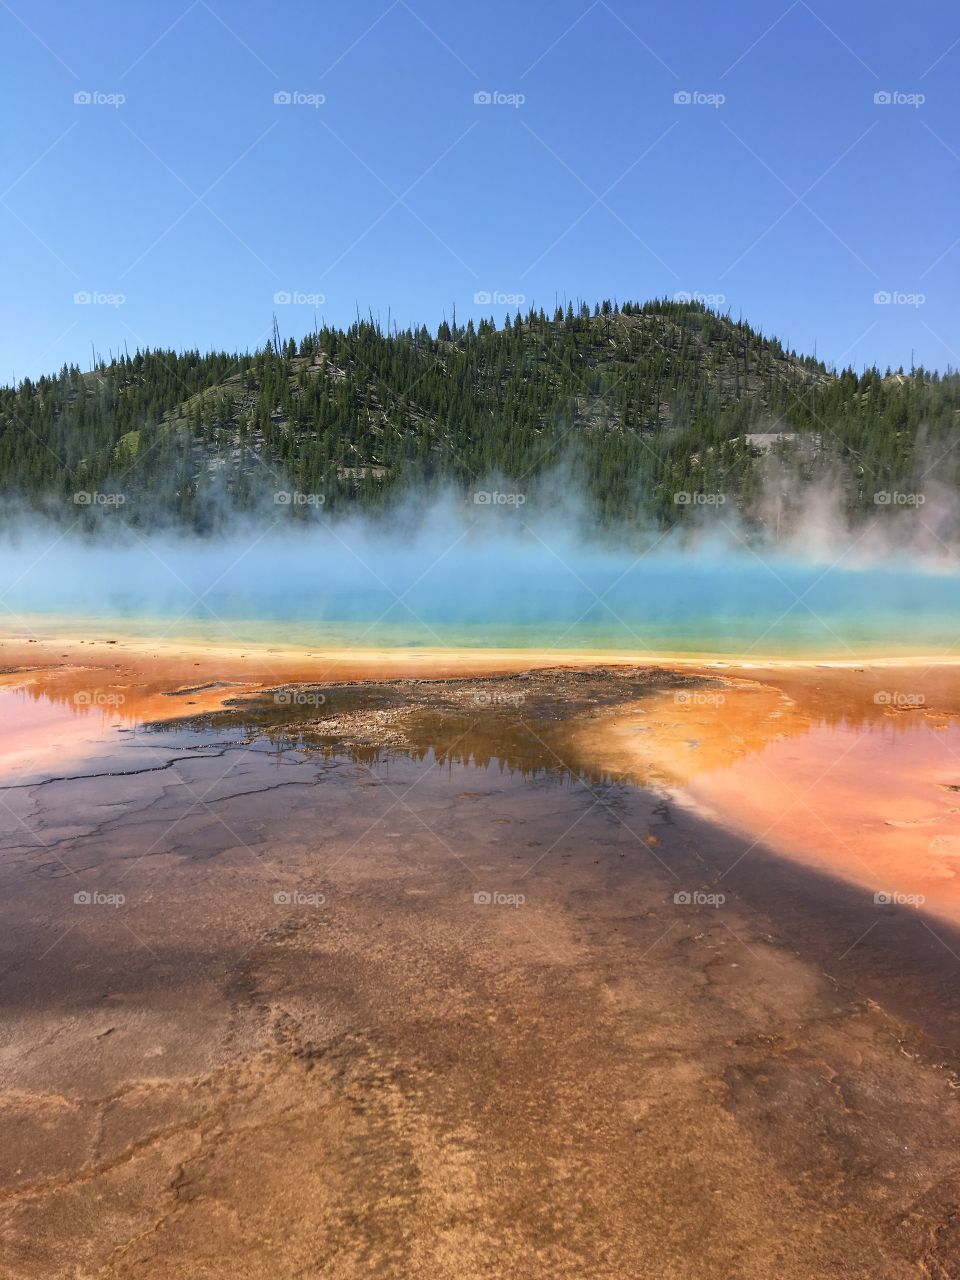 The Grand Prismatic Spring in Yellowstone National Park, USA